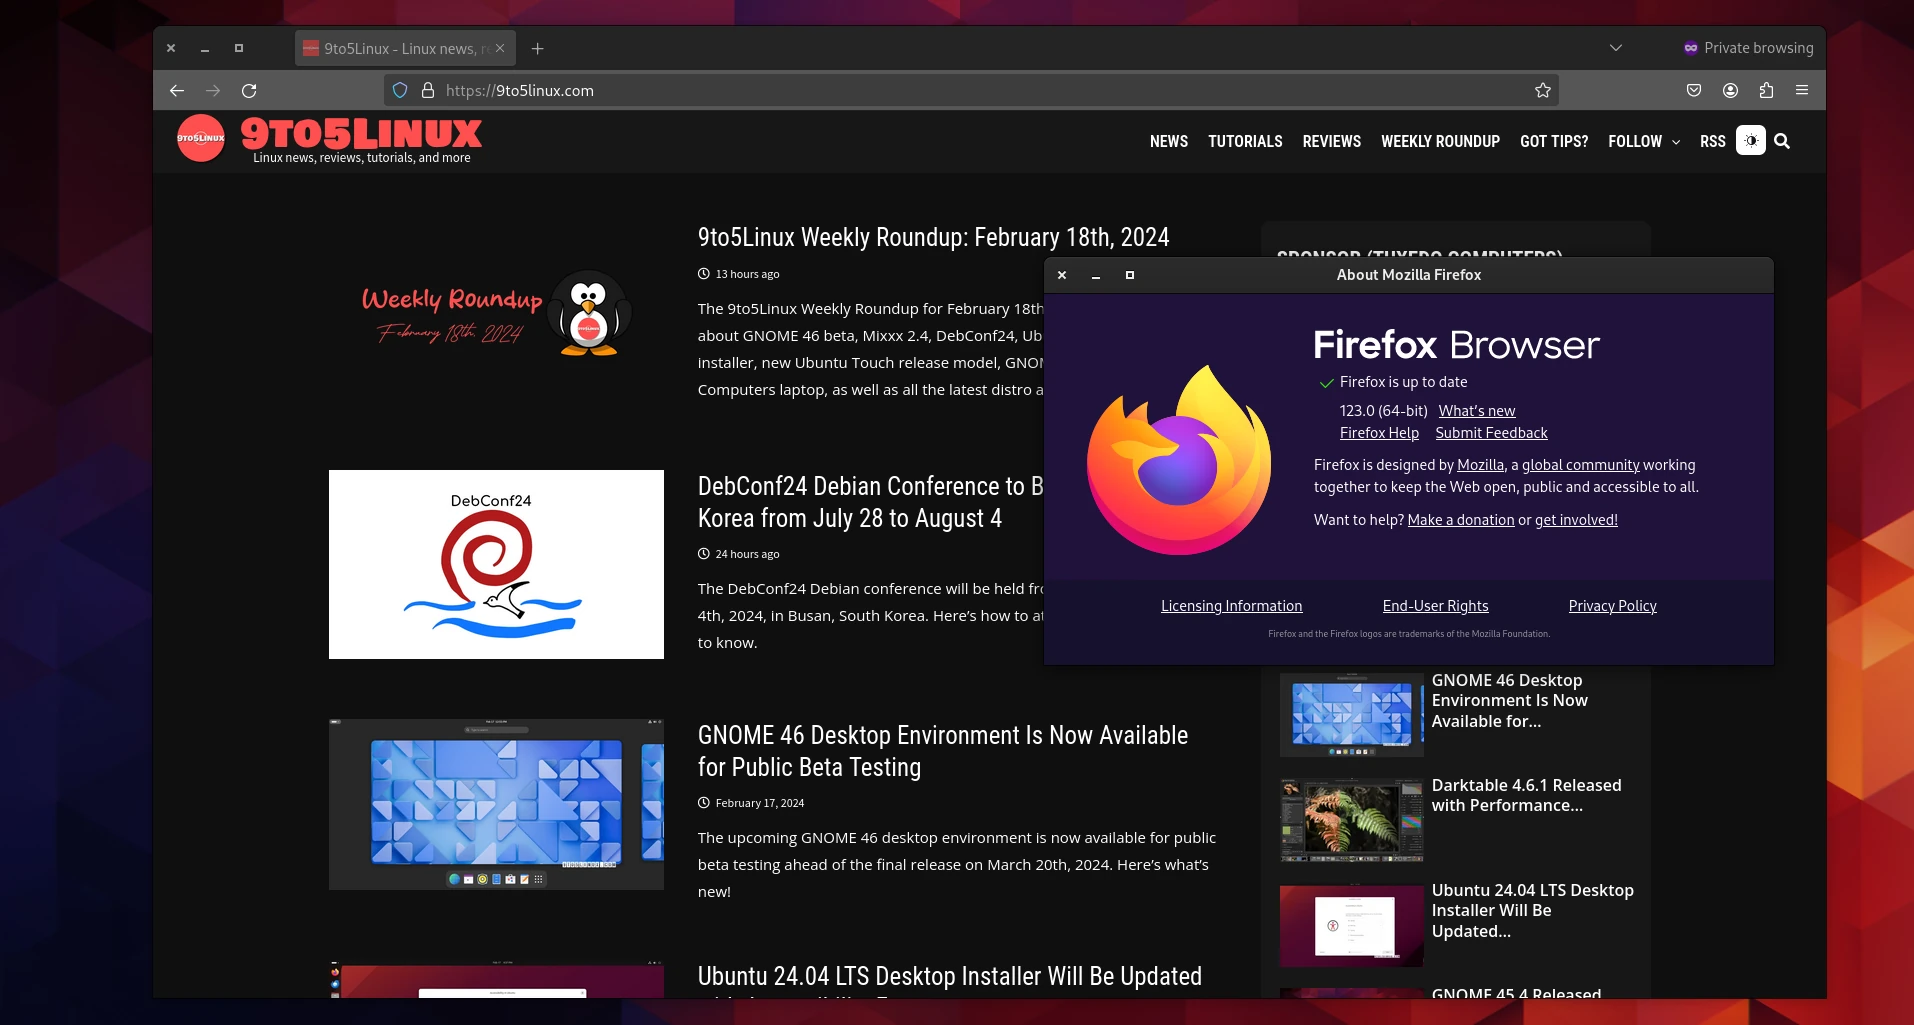 Mozilla Firefox 123 Is Now Available for Download, Here’s What’s New